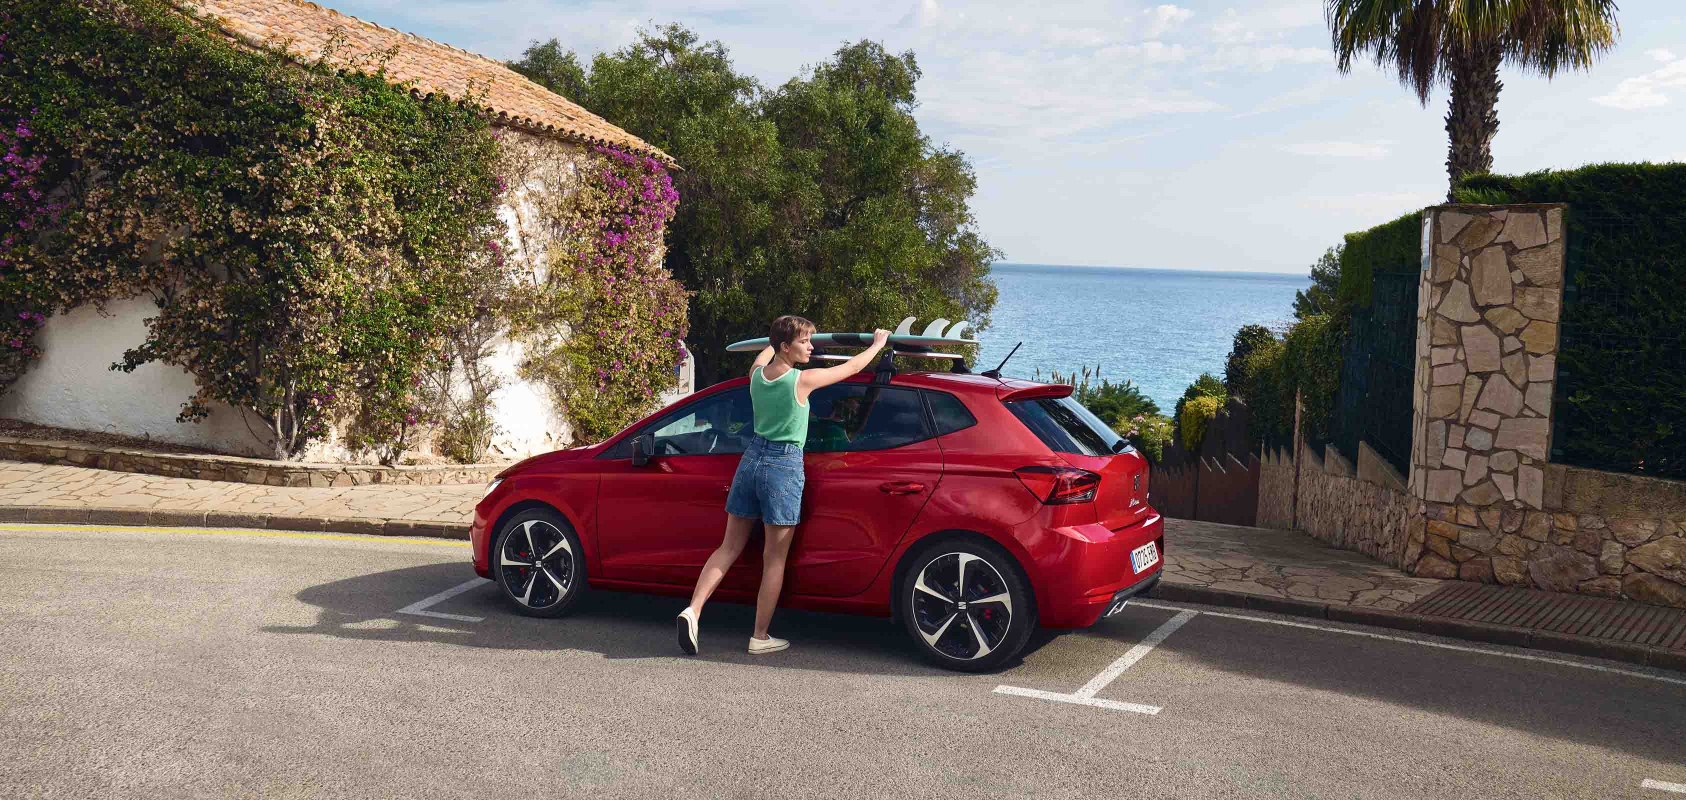 family-enjoying-a-picnic-with-a-seat-leon